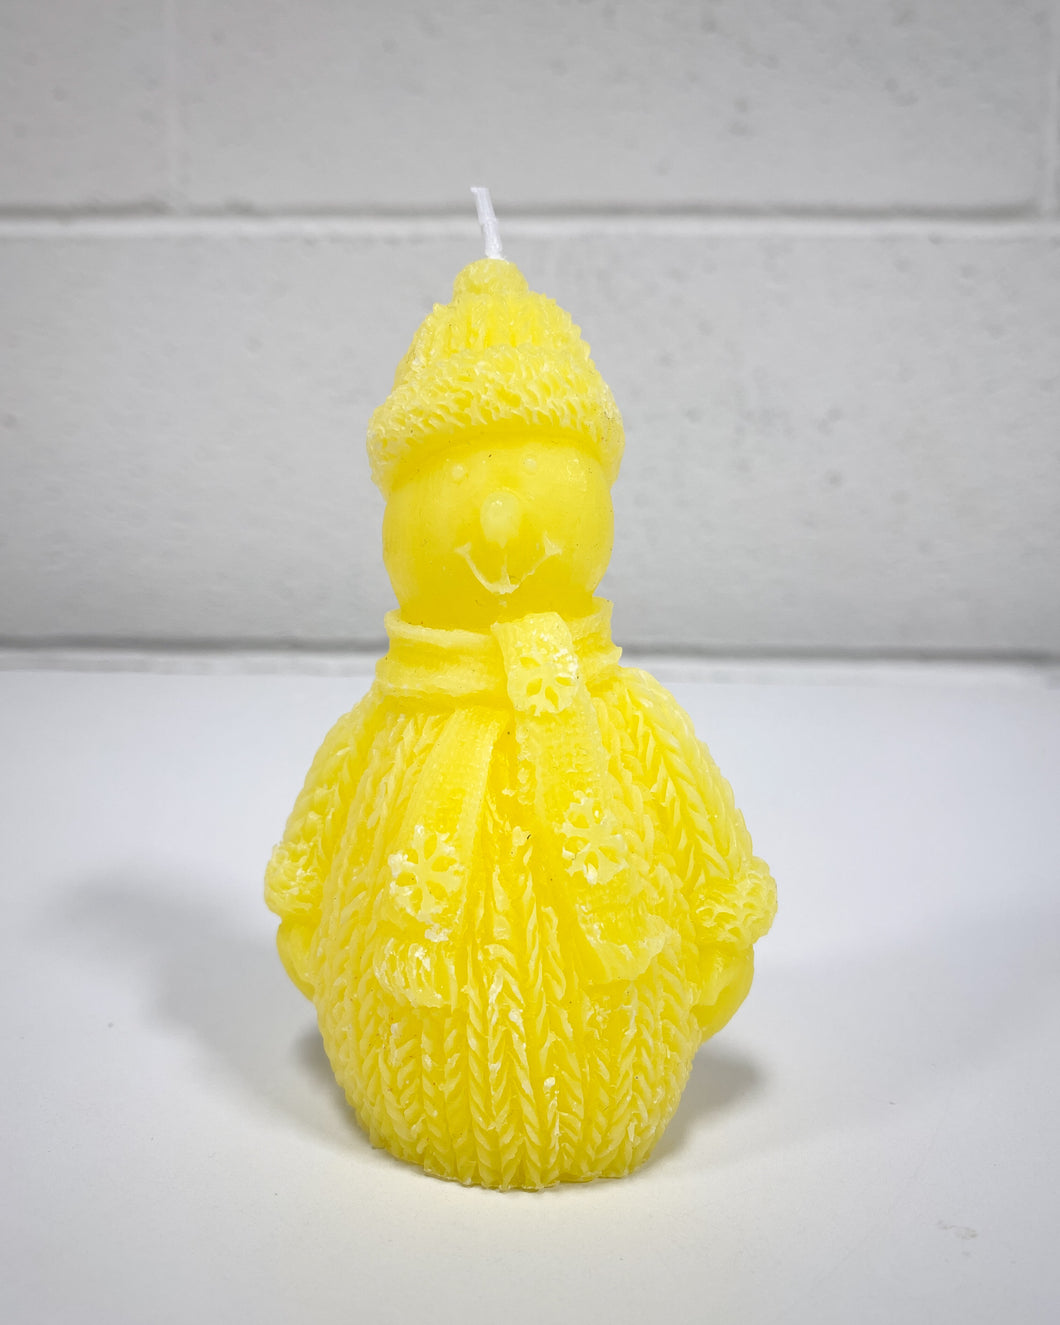 Yellow Snowman Candle